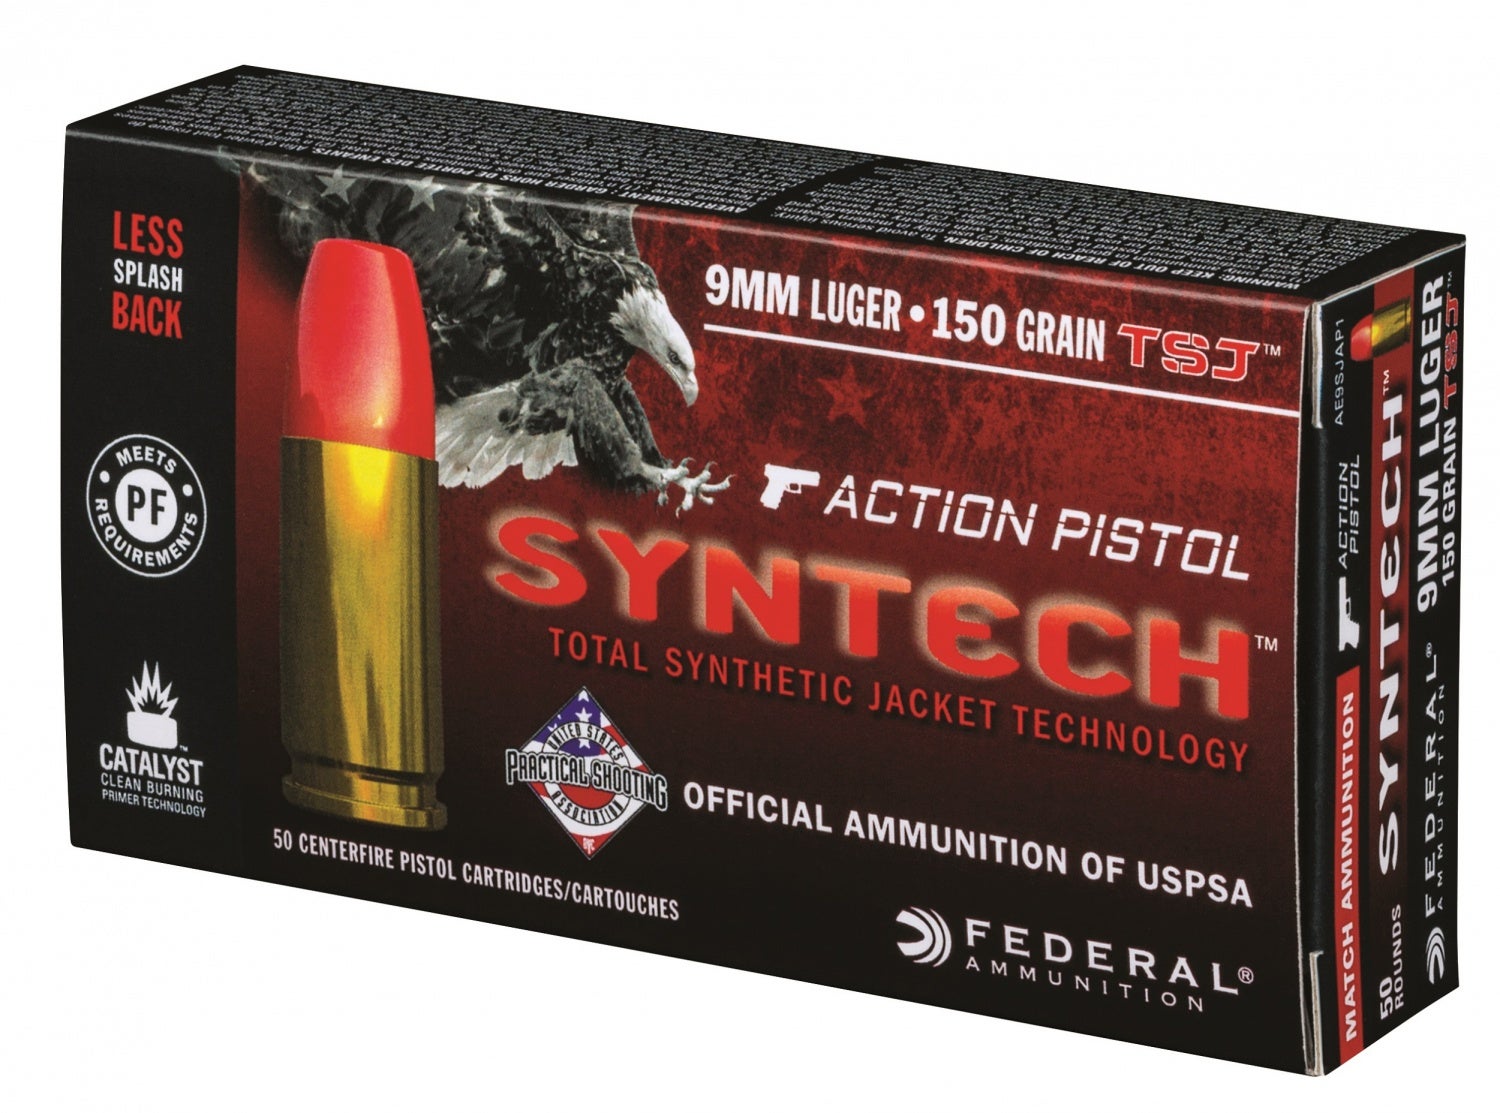 2021 Price Increases for Federal, CCI and Speer Ammunition